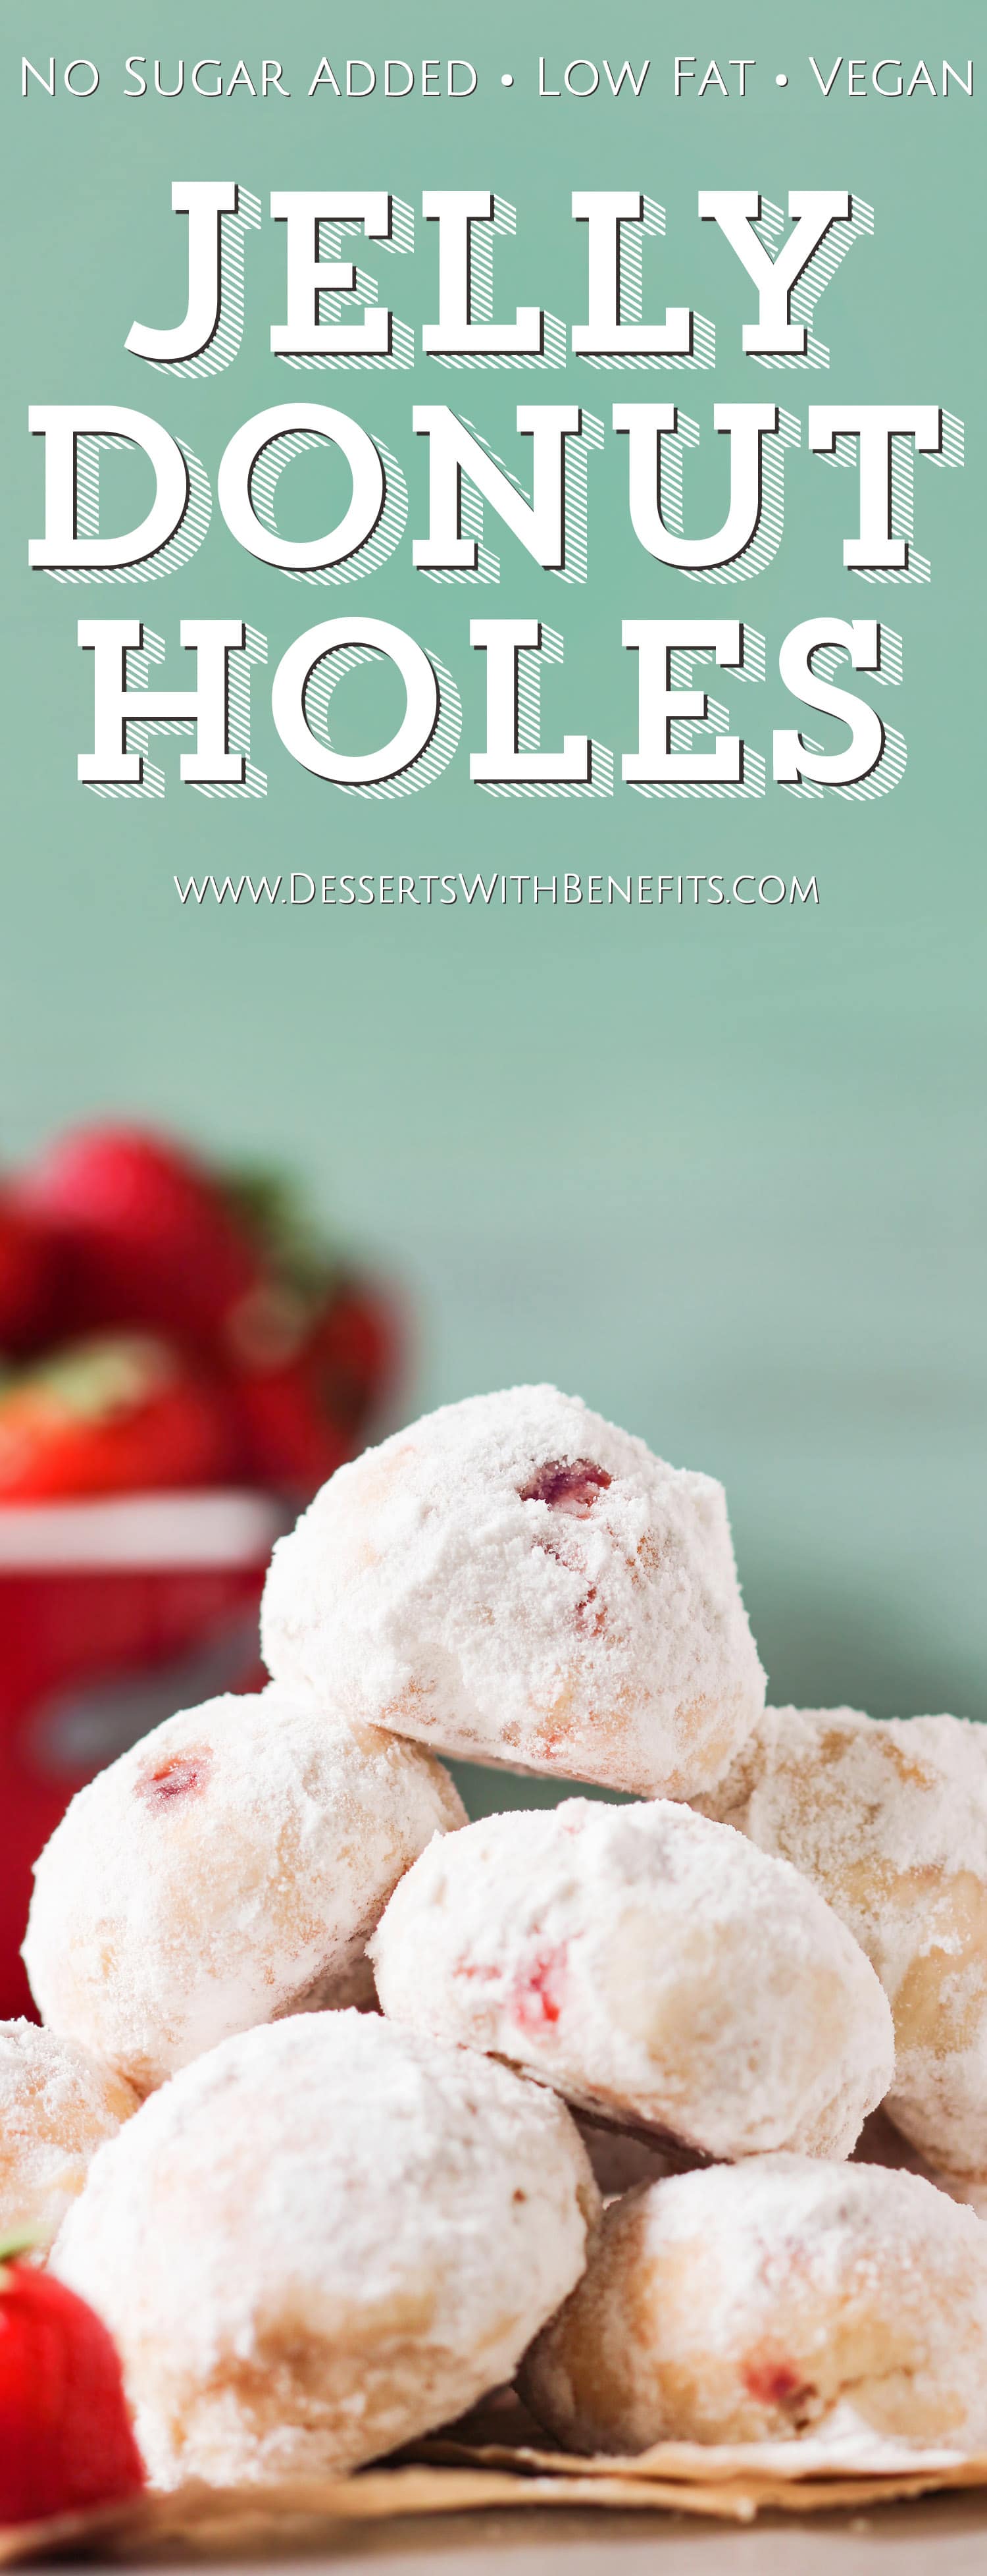 These 4-ingredient Jelly Filled Donut Holes are baked, not fried! They taste as unhealthy and delicious as regular donuts, but these are low sugar, low fat, and vegan. Nothing much better than a fresh batch of soft and fluffy Donut Holes made without the butter, artificial ingredients, and excess sugar and calories! Healthy Dessert Recipes at the Desserts With Benefits Blog (www.DessertsWithBenefits.com)